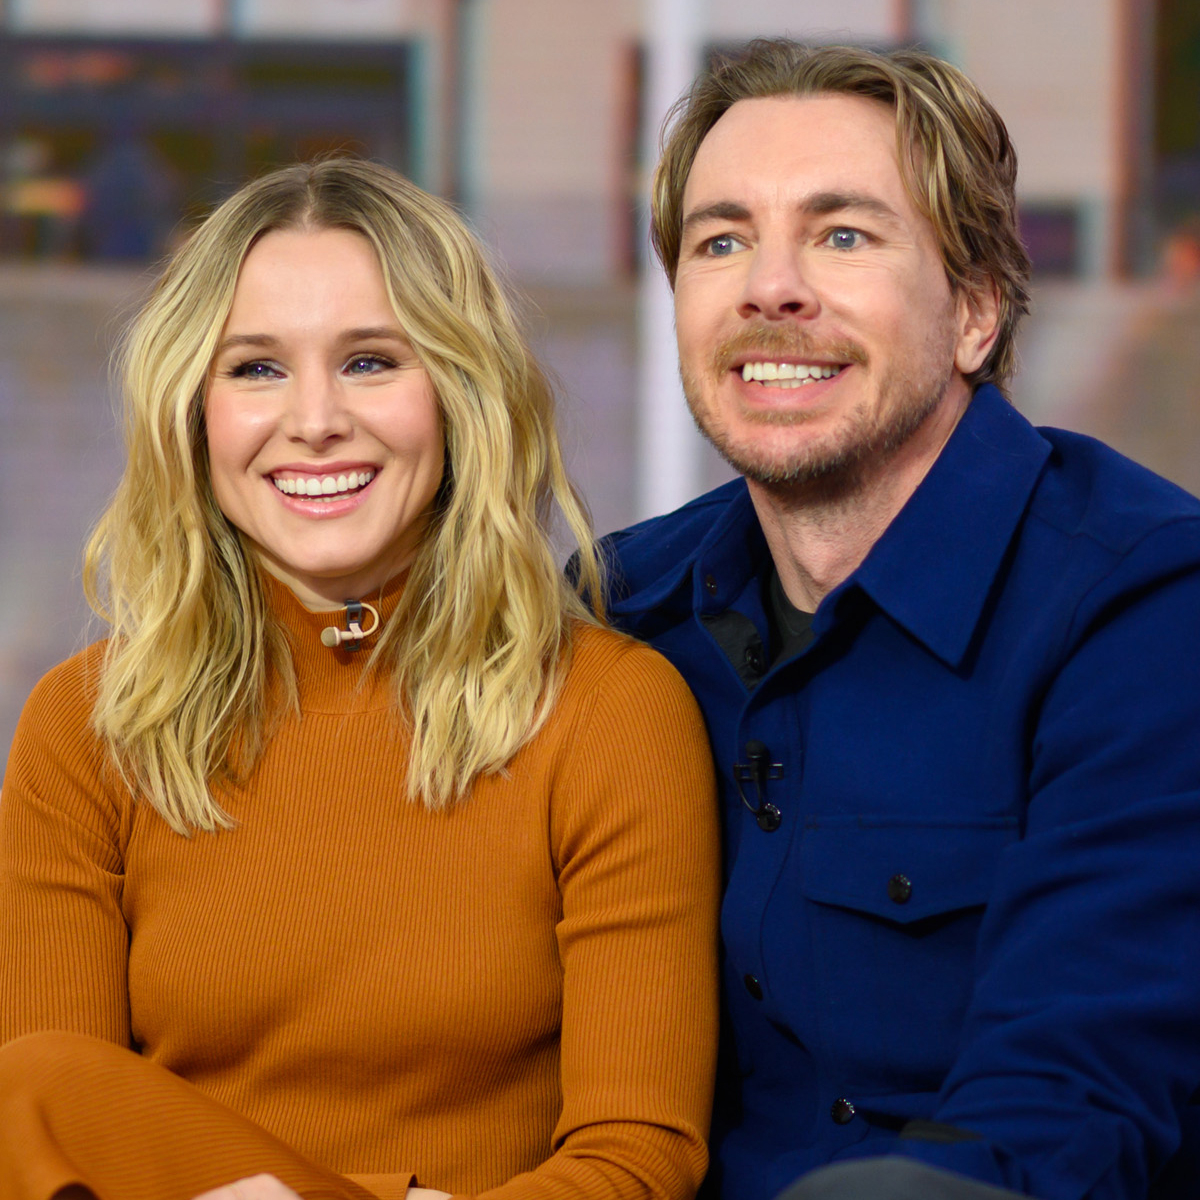 Dax Shepard Says He and Kristen Bell “Did Not Want a Second Child”